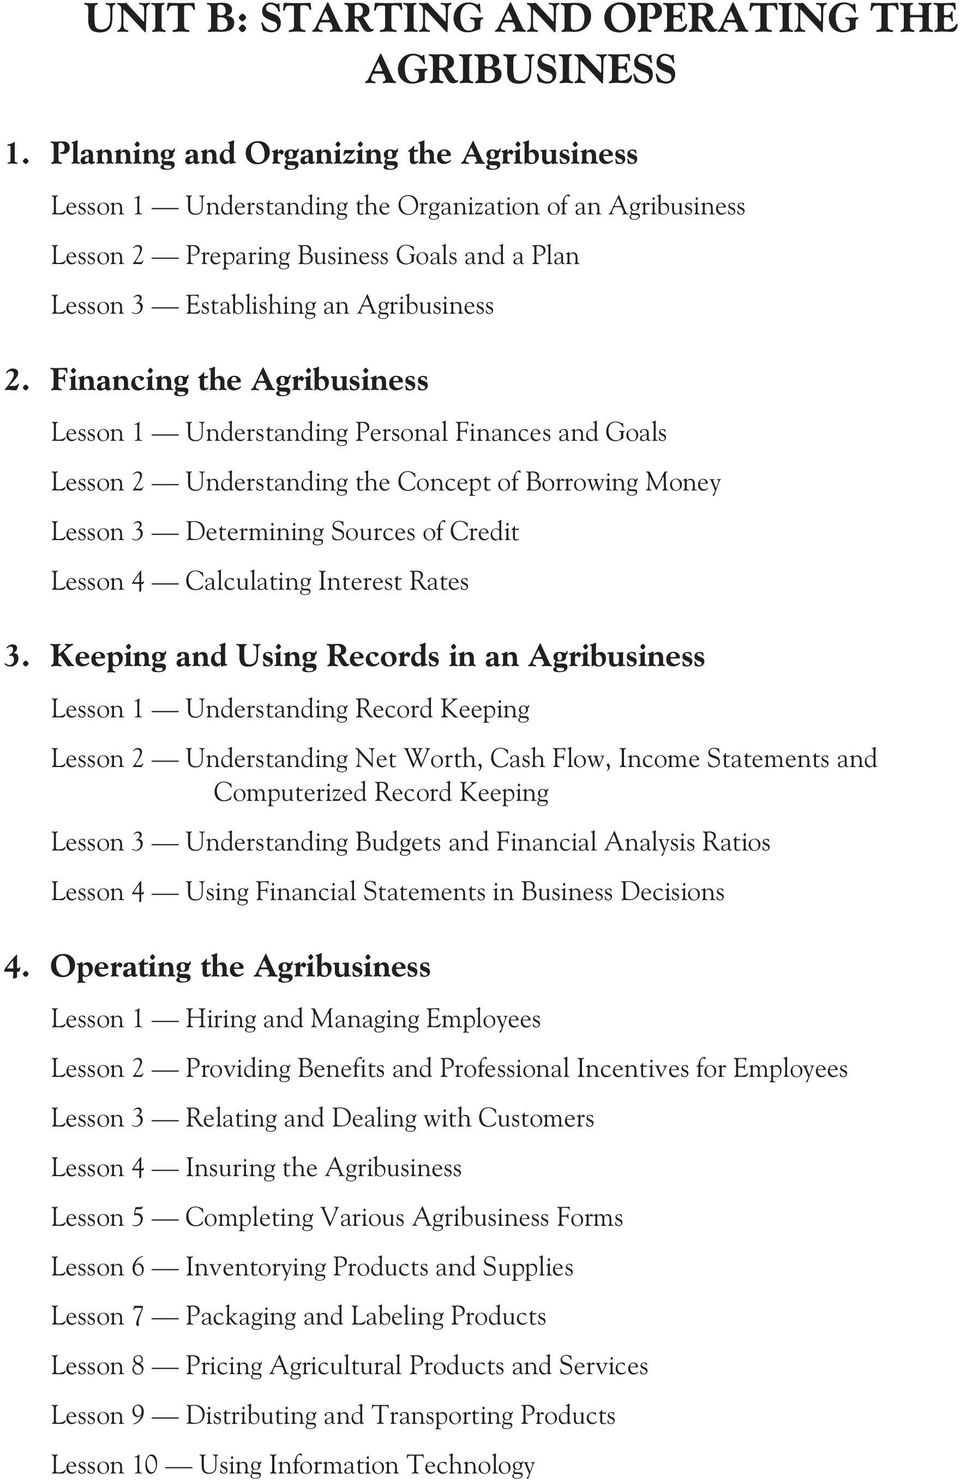 Financing the Agribusiness Lesson 1 Understanding Personal Finances and Goals Lesson 2 Understanding the Concept of Borrowing Money Lesson 3 Determining Sources of Credit Lesson 4 Calculating